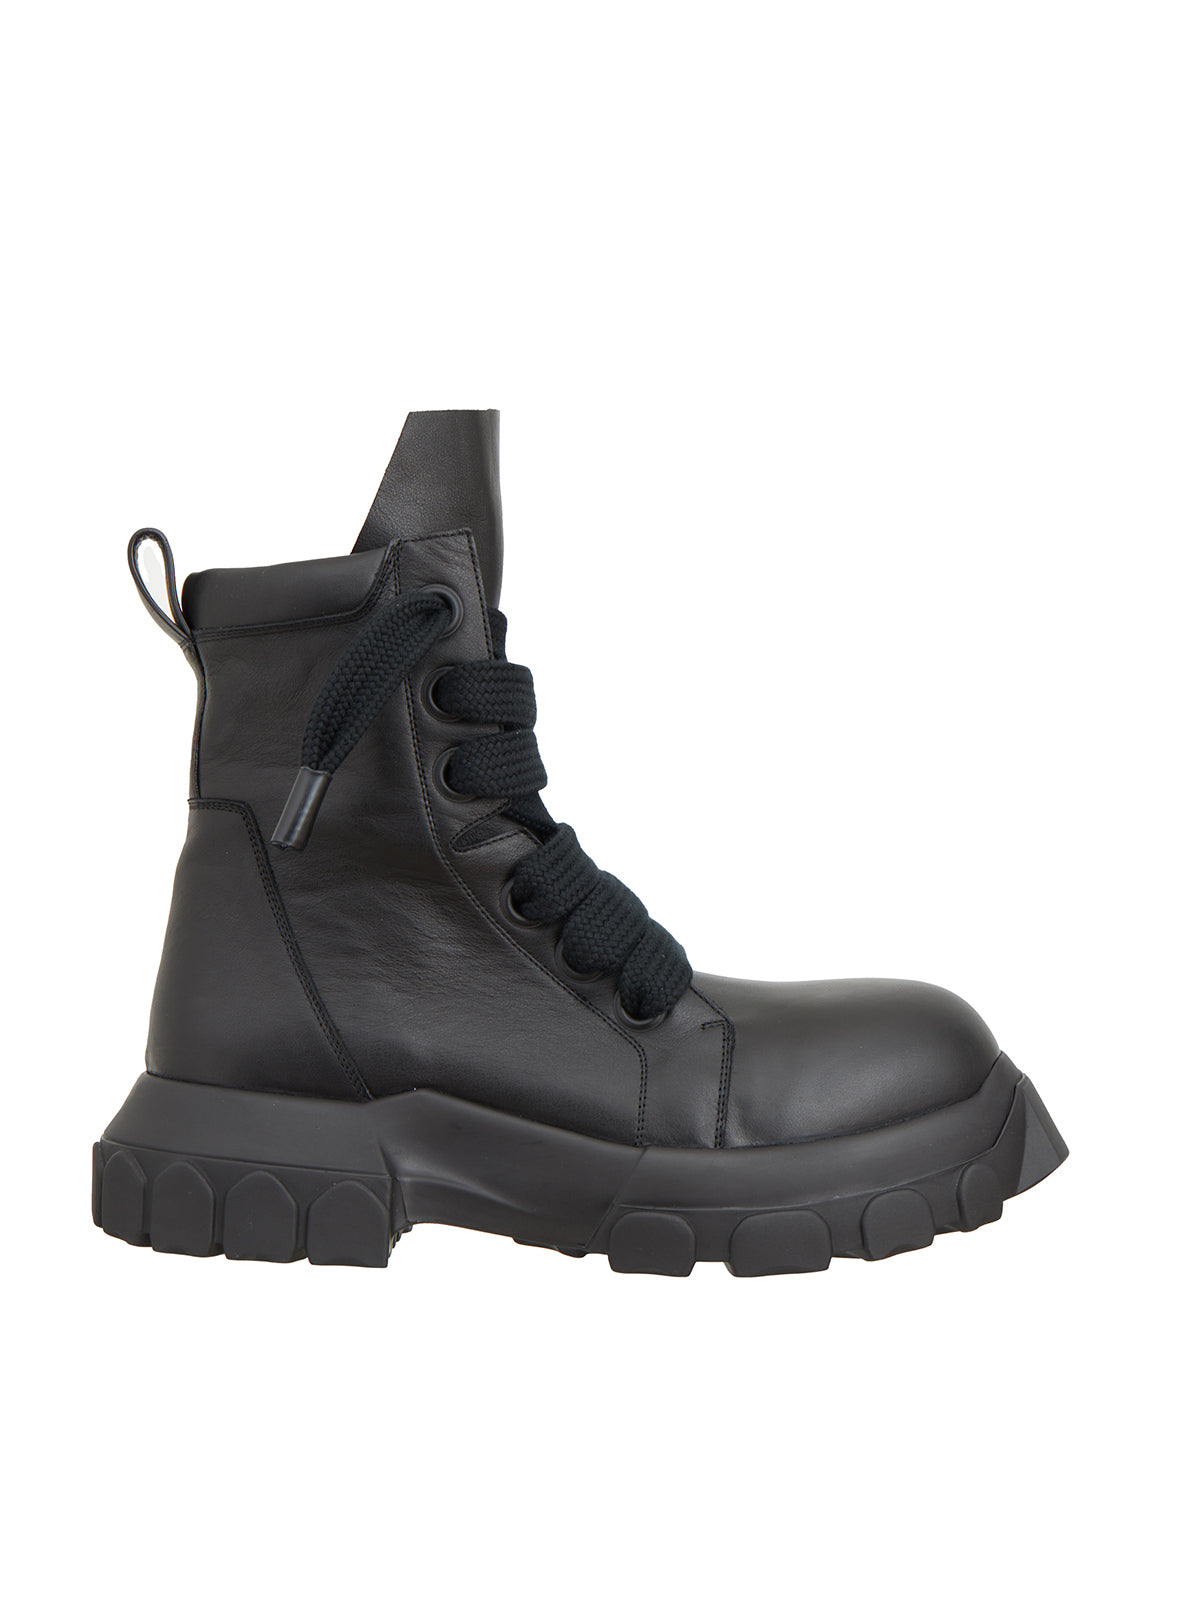 RICK OWENS Classic Black Lace-Up Tractor Boots for Men - CARRYOVER 2024